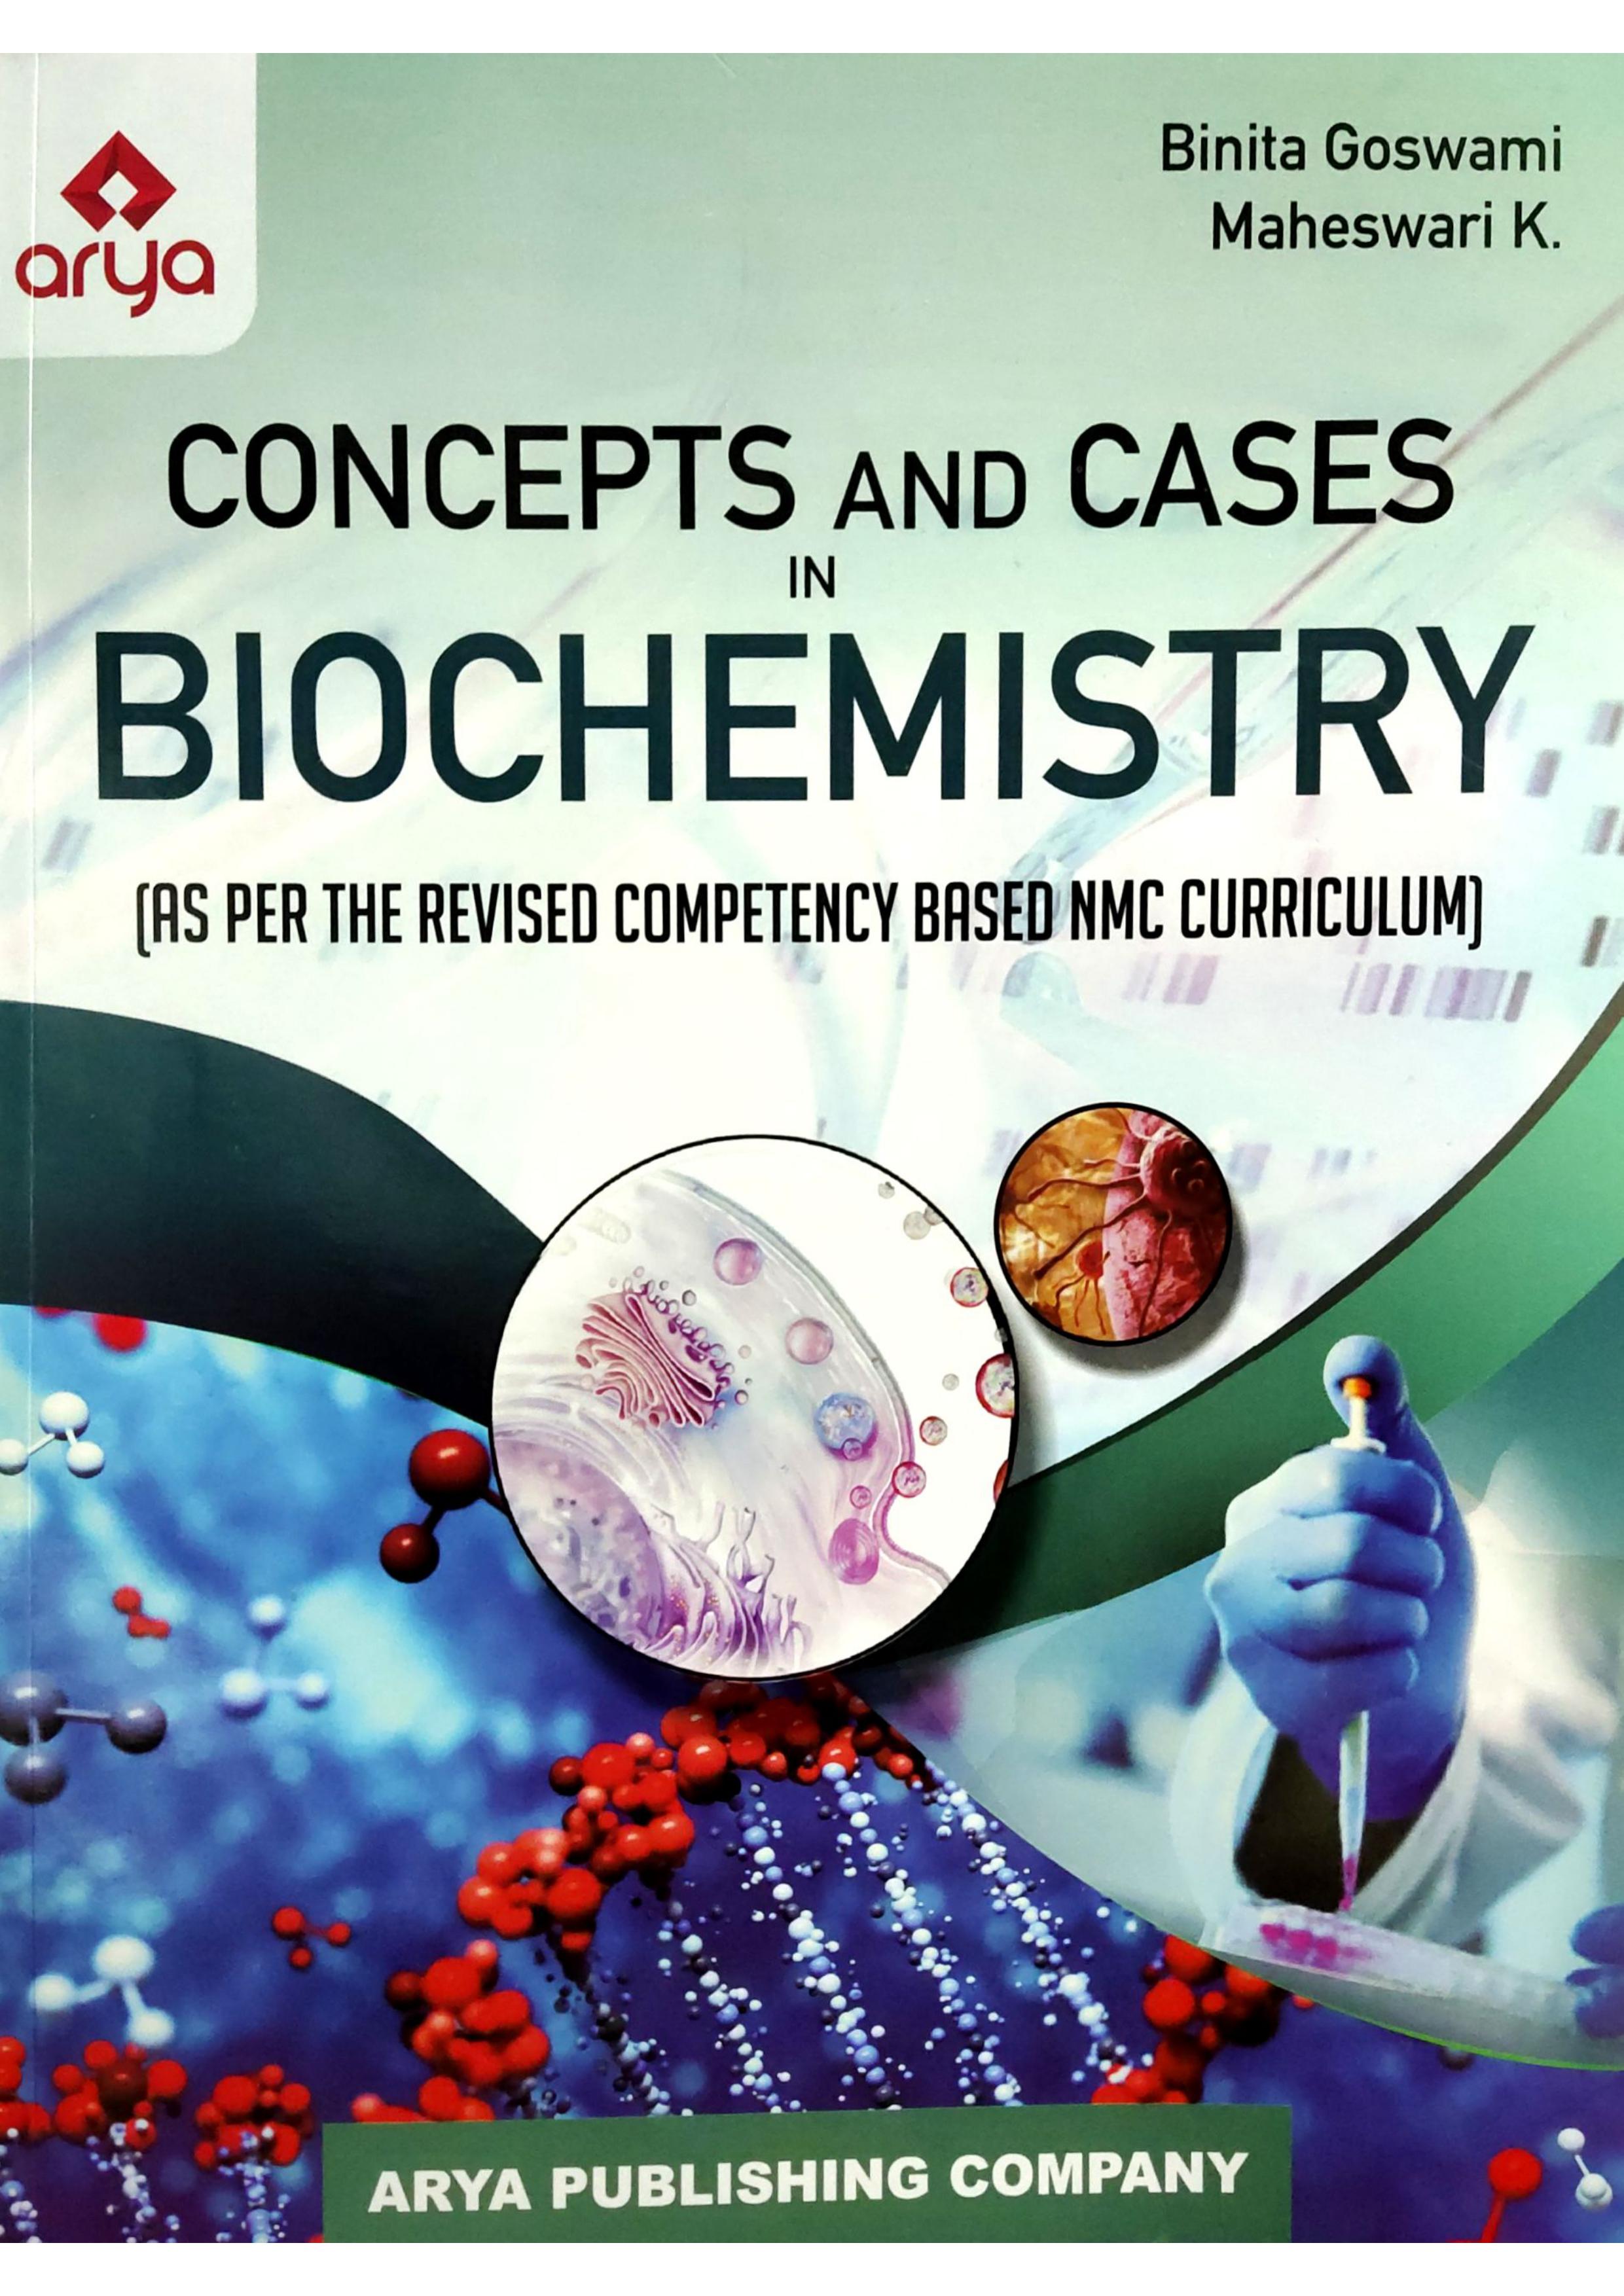 Concepts and Cases in Biochemistry(As per the revised competency)